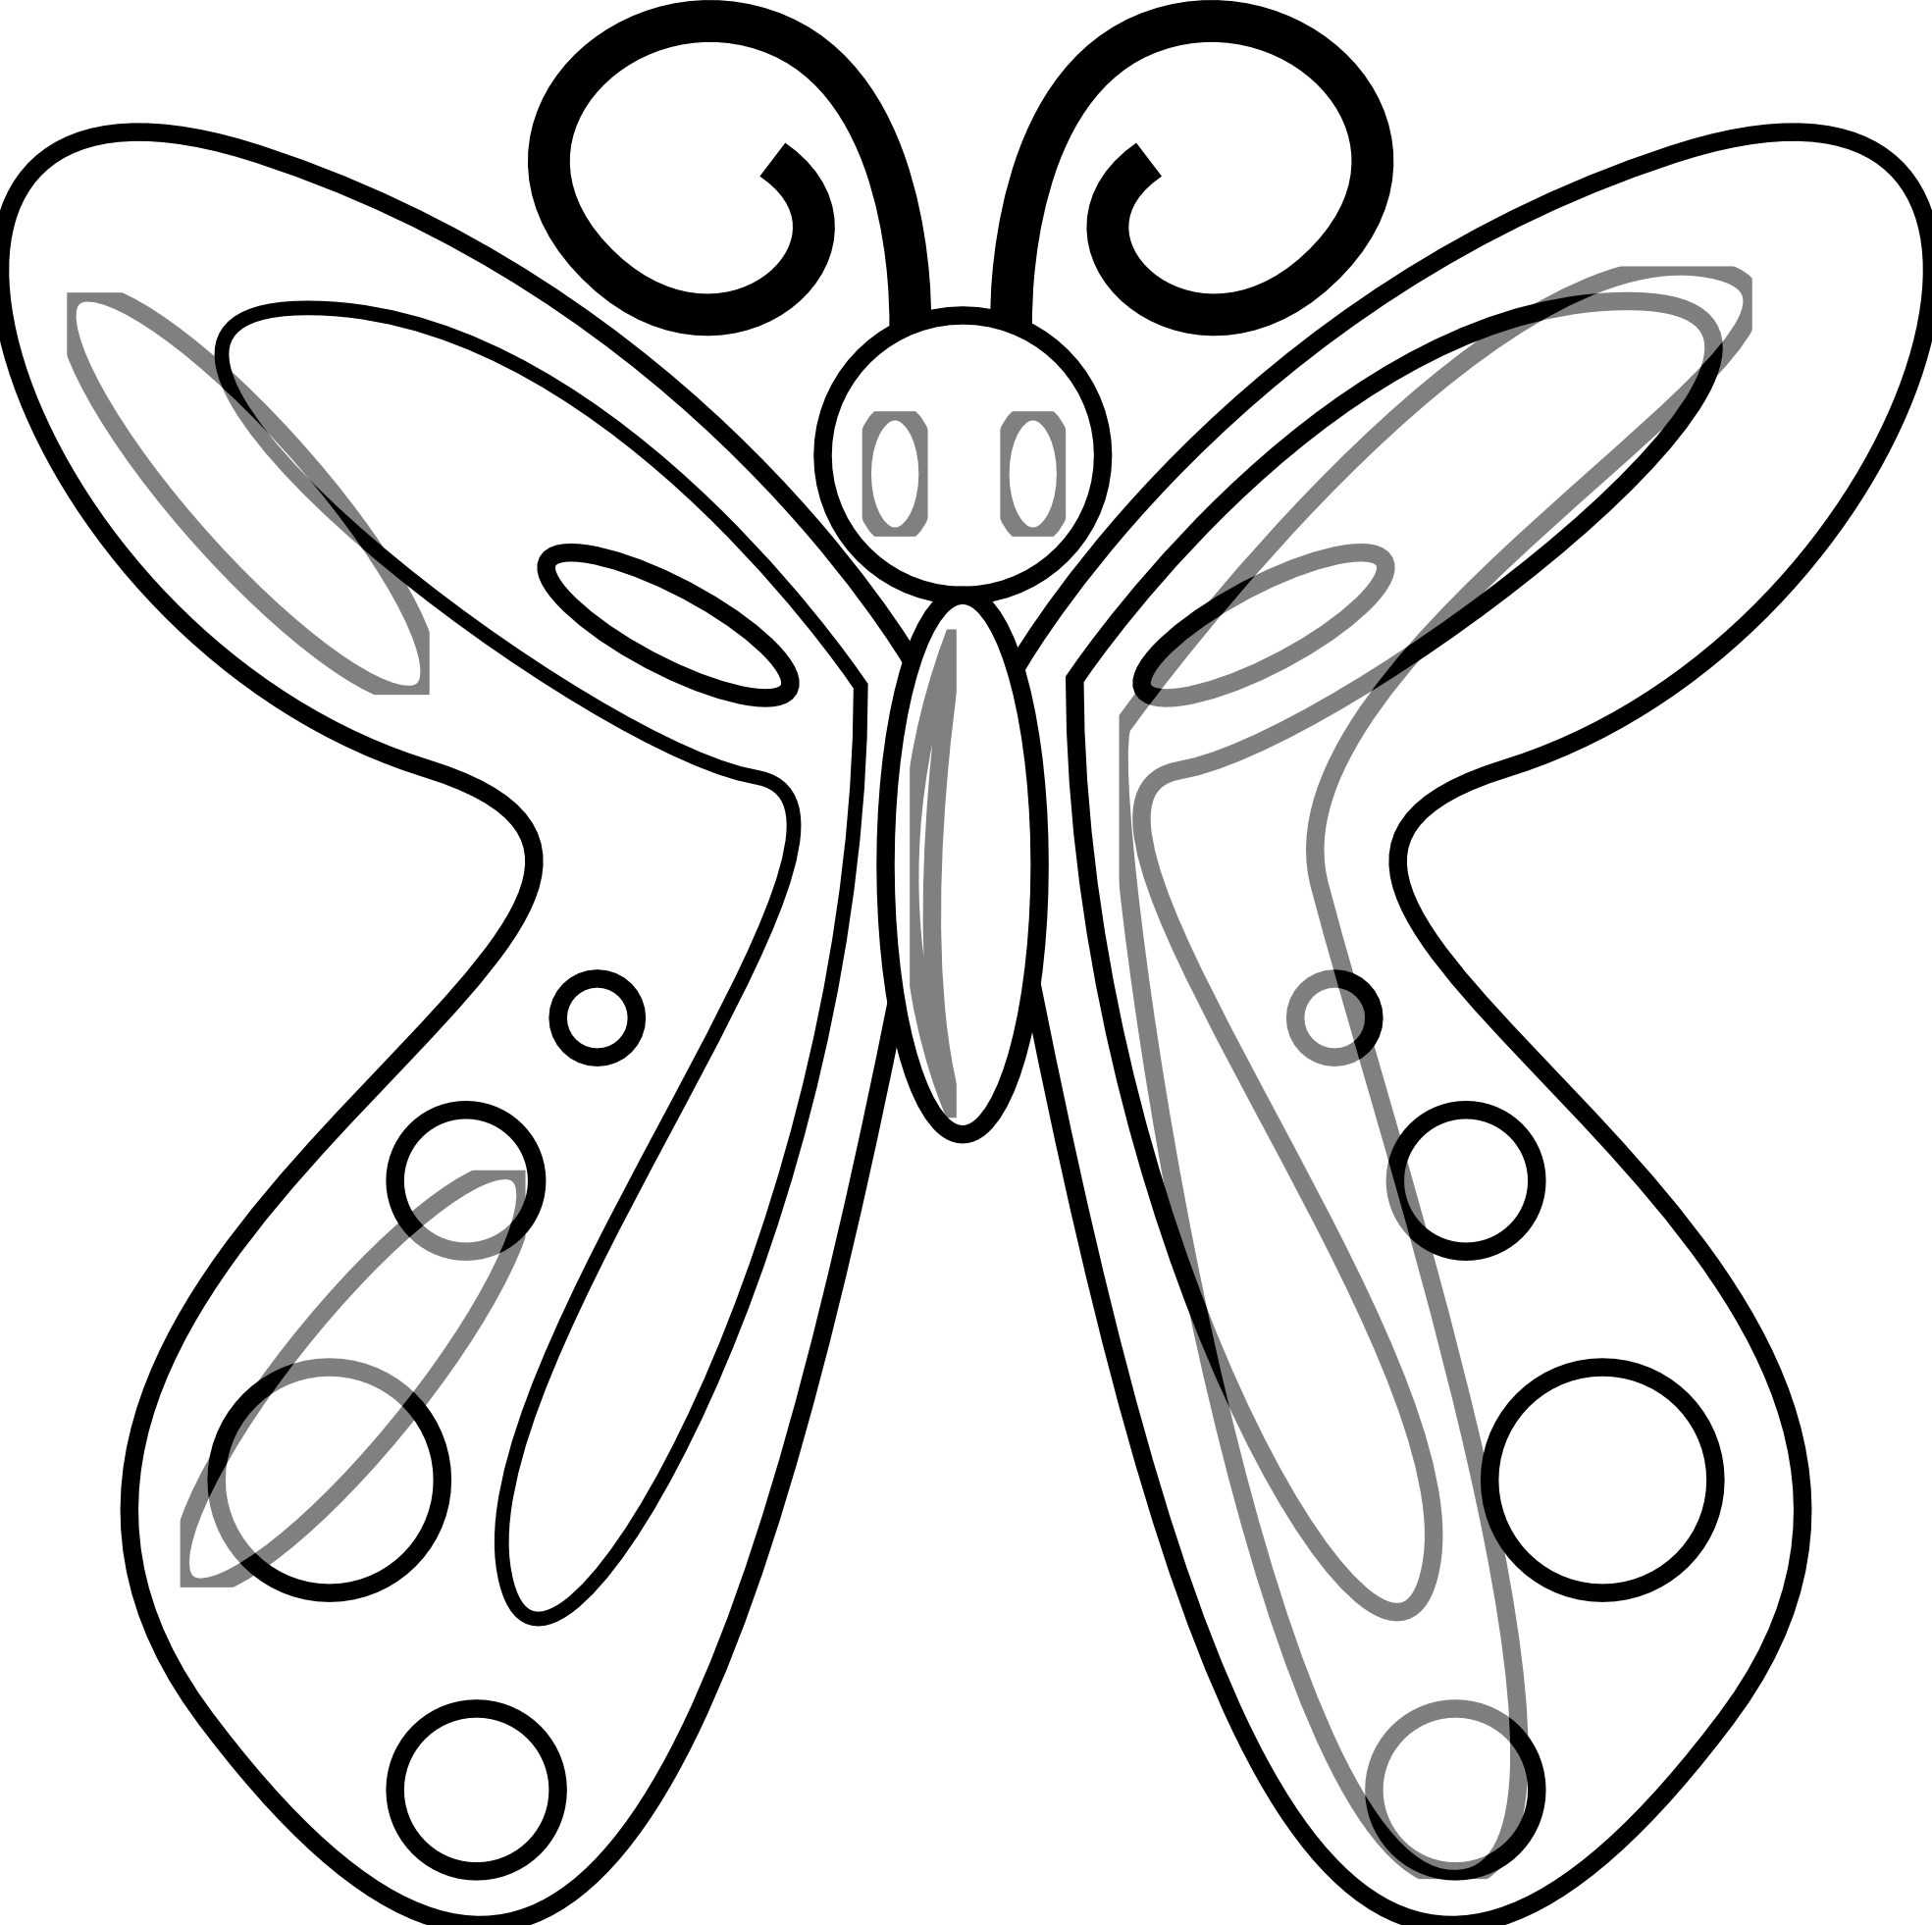 Butterfly 14 Black White Line Art Drawing Scalable Vector Graphics ...